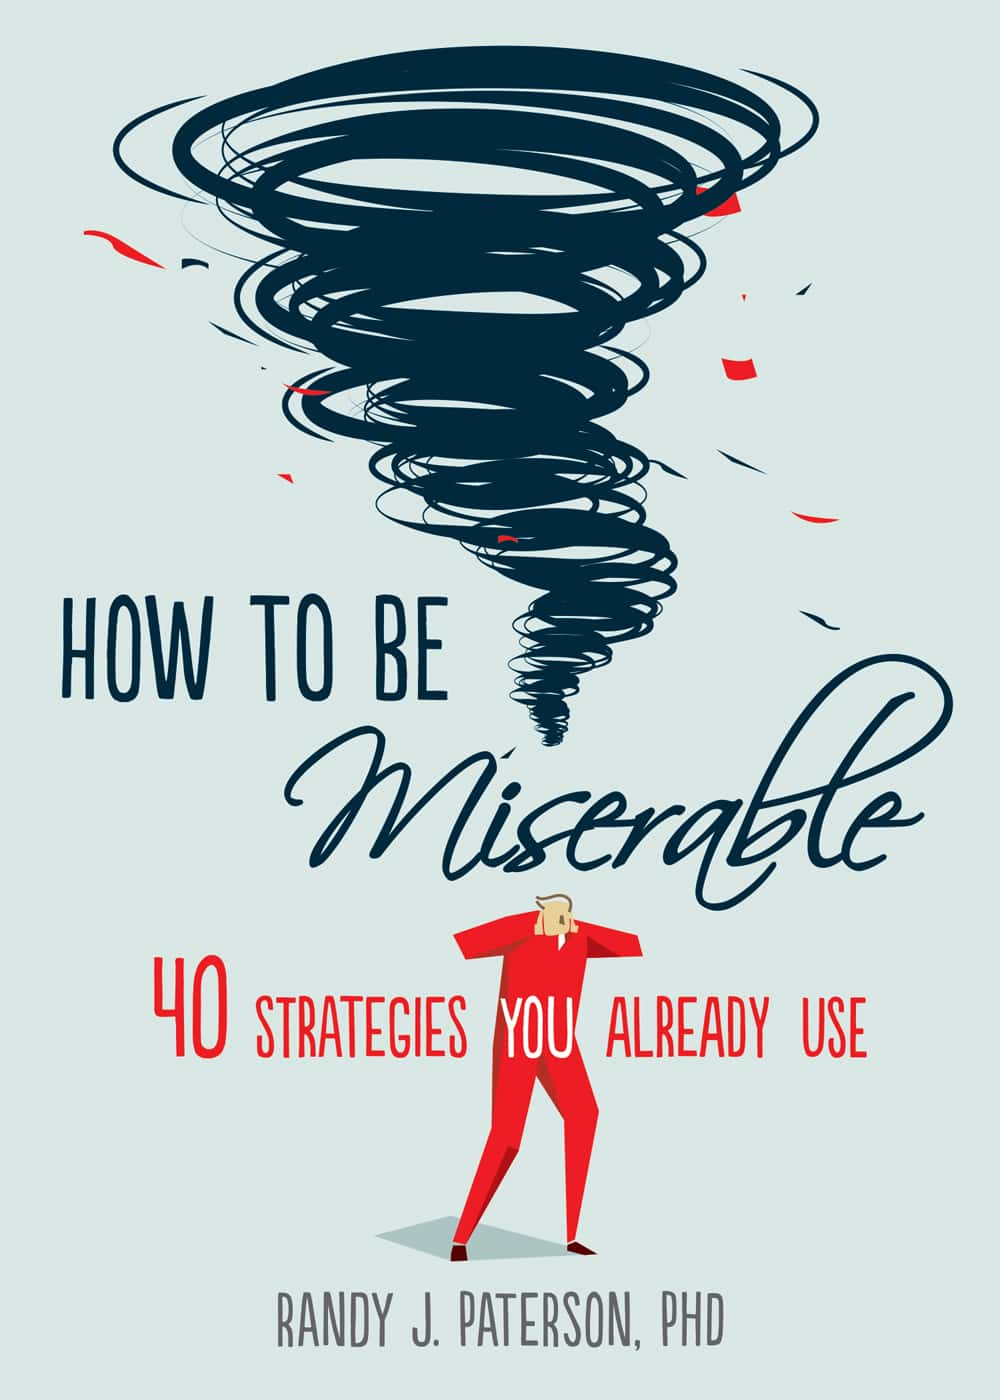 <p>Don't be turned away by the presence of a self-help book so high on the internet's ranking of the best nonfiction books. Randy J. Paterson's <em>How to Be Miserable</em> isn't like the other titles in this subgenre of nonfiction. </p>    <p>Readers appreciate this book for its funny yet wise approach to understanding and avoiding common self-destructive behaviors. Paterson's work offers a unique perspective on happiness and personal growth that teaches you how to use reverse psychology against your mind.</p>    <ul> <li><strong>Author:</strong> Randy J. Paterson, PhD</li>    <li><strong>Page count:</strong> 248</li>    <li><strong>First published:</strong> 2016</li> </ul>